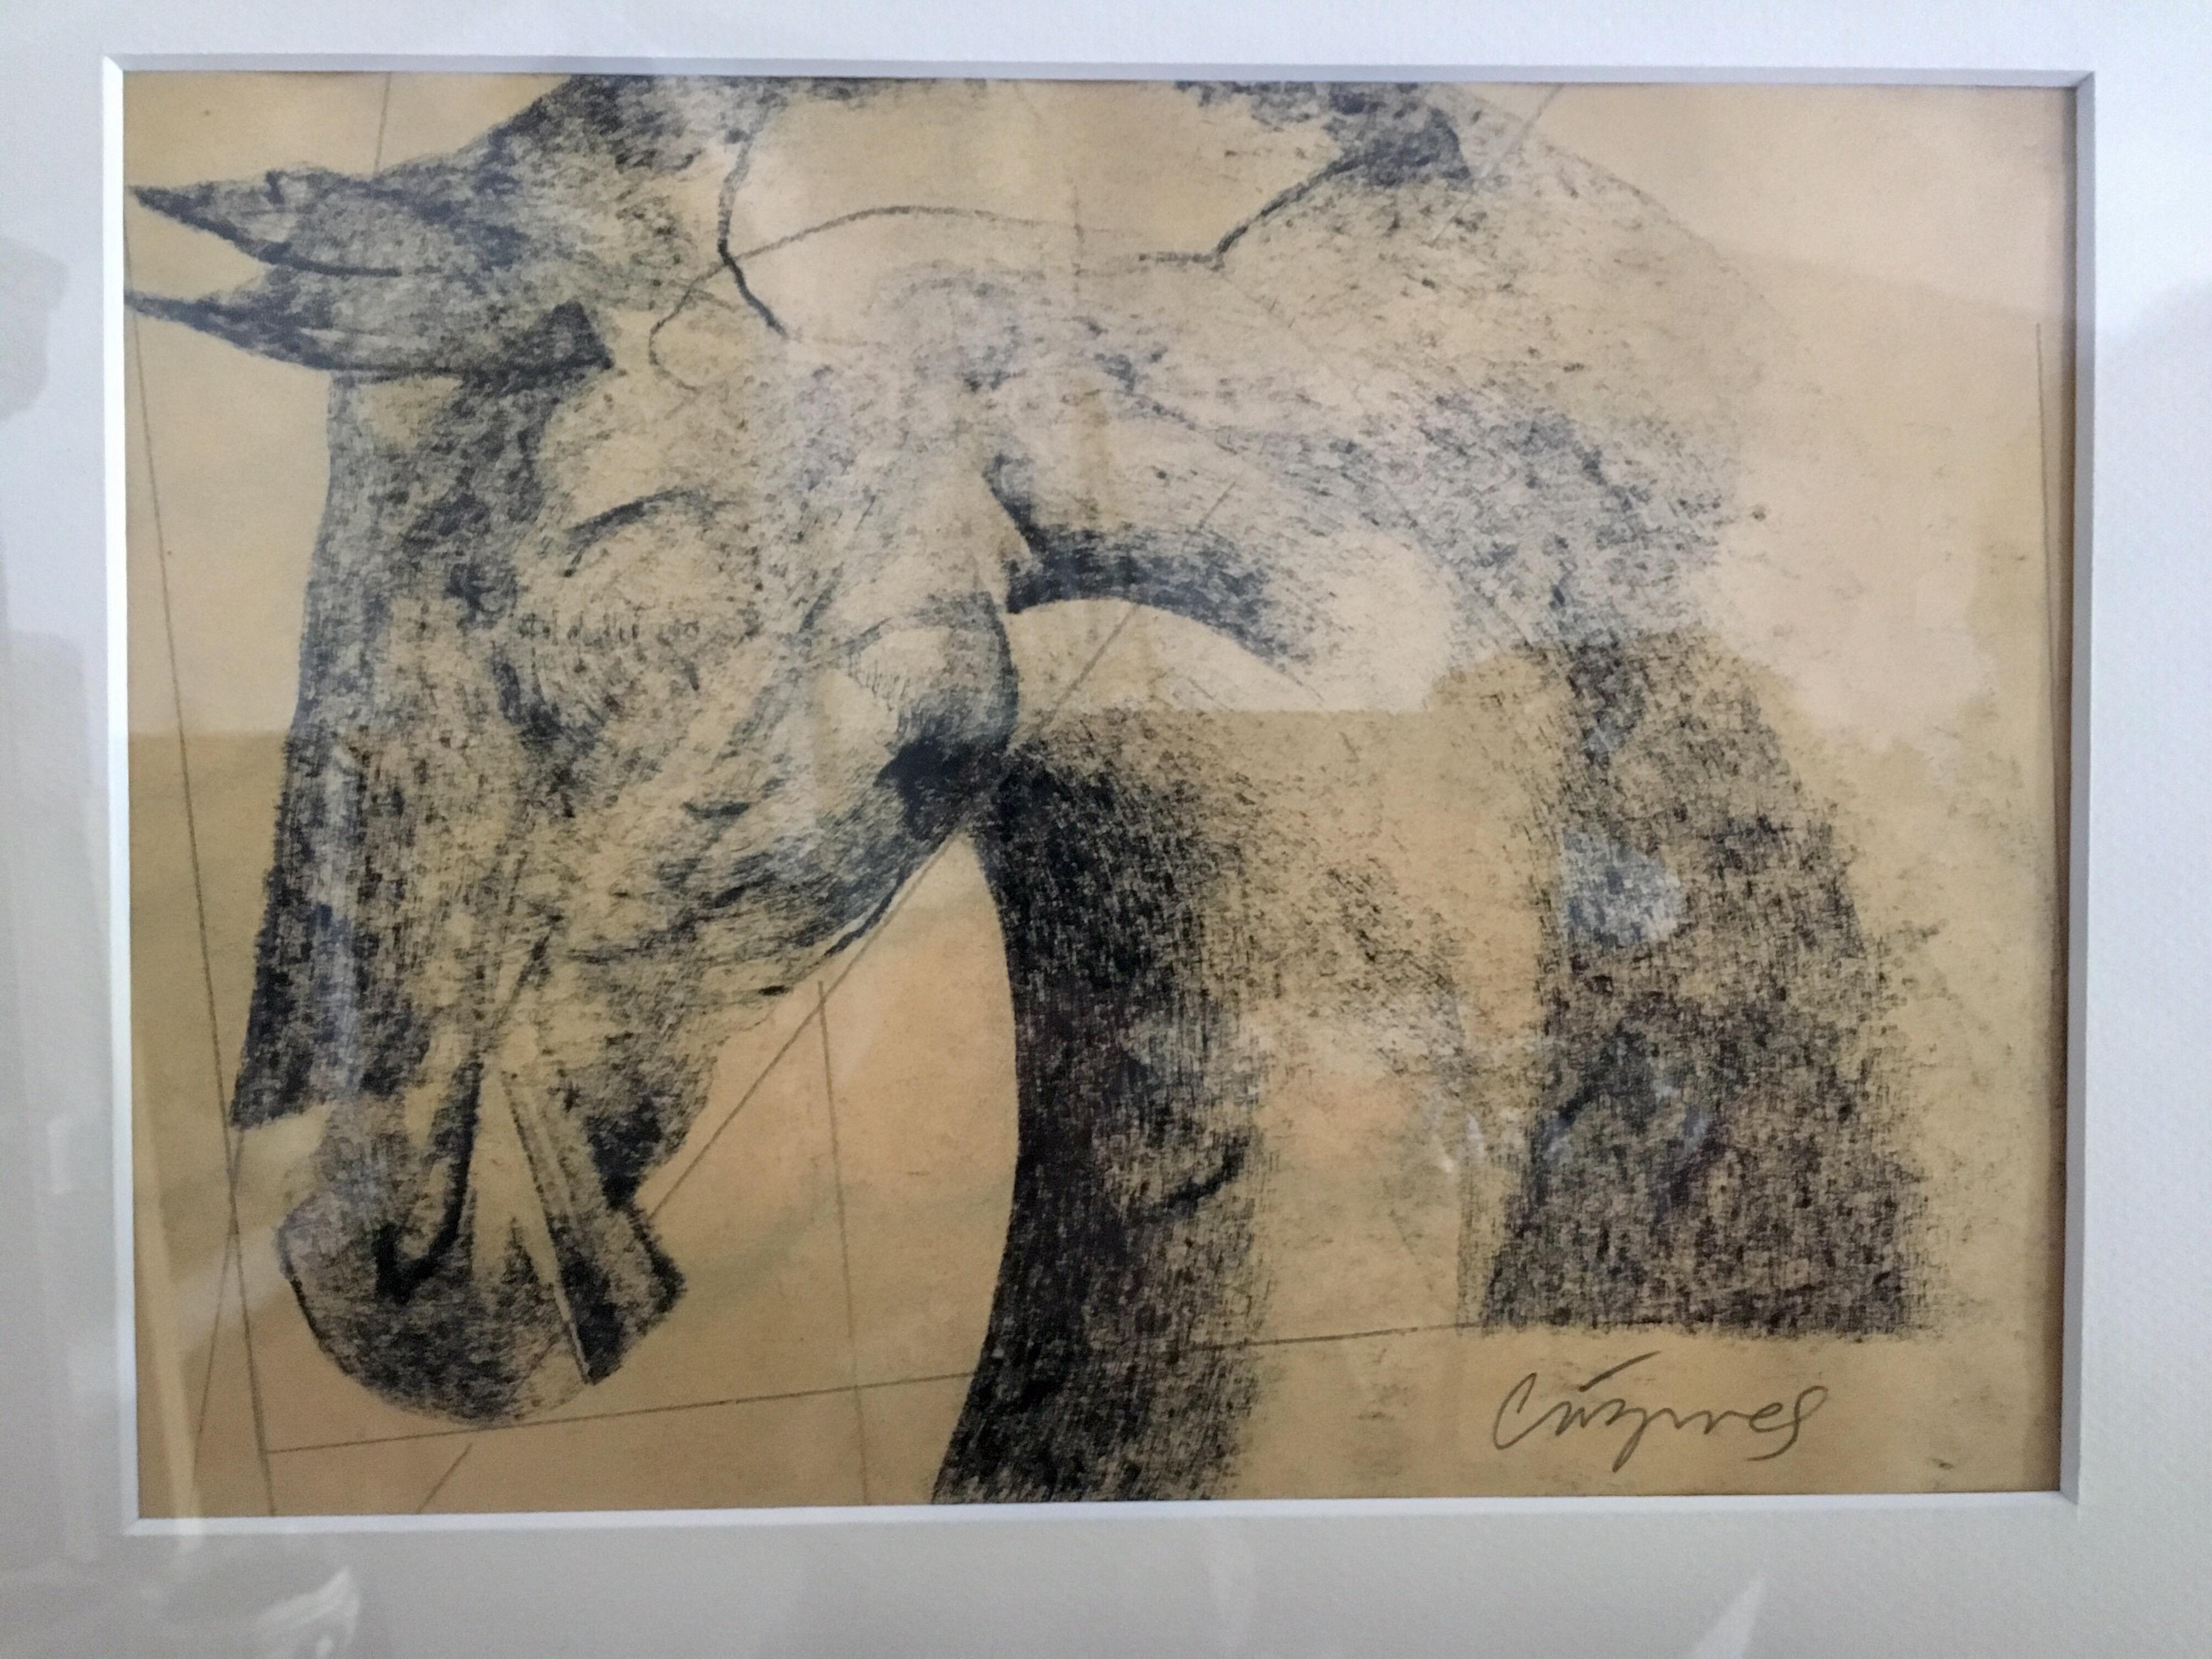 Original charcoal on paper. Study of a horse. Juan Carlos Cazares was born in Queretaro, Mexico in 1976. In 1997 he won the prize for young adults at the Queretaro Museum of Art. Juan Carlos has continually exhibited in San Miguel Allende,